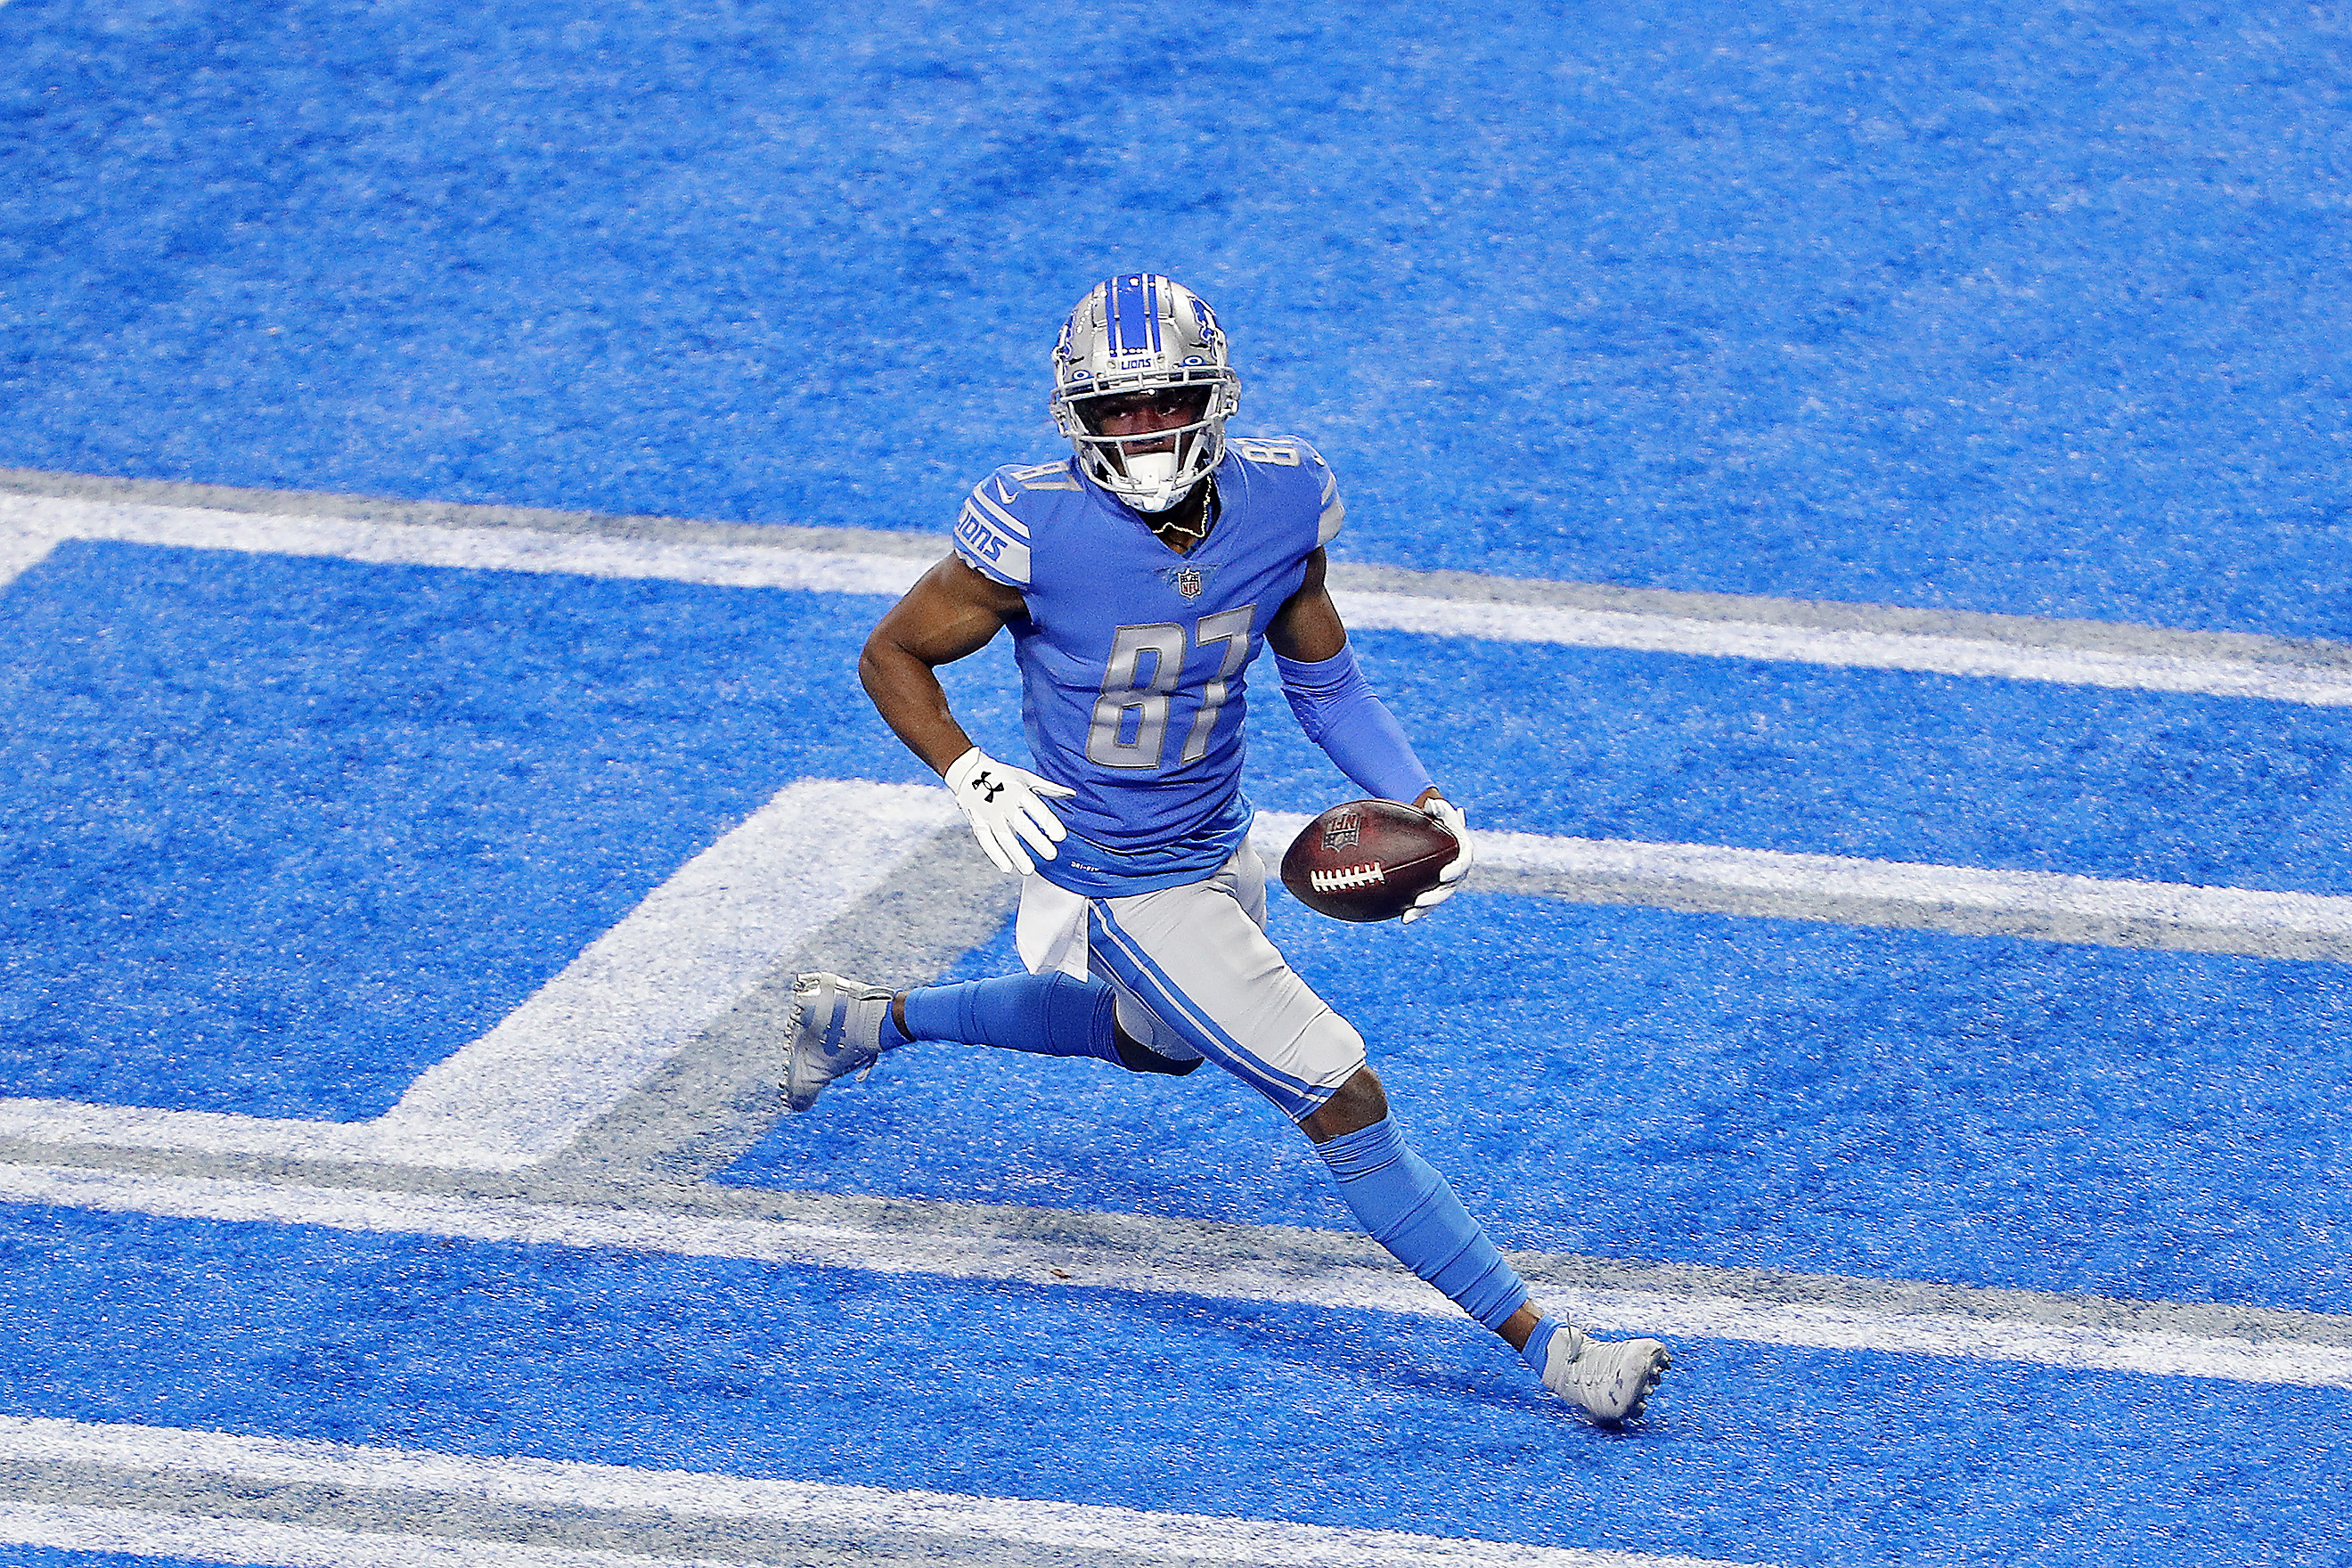 2021 Detroit Lions Schedule: Complete schedule, tickets and